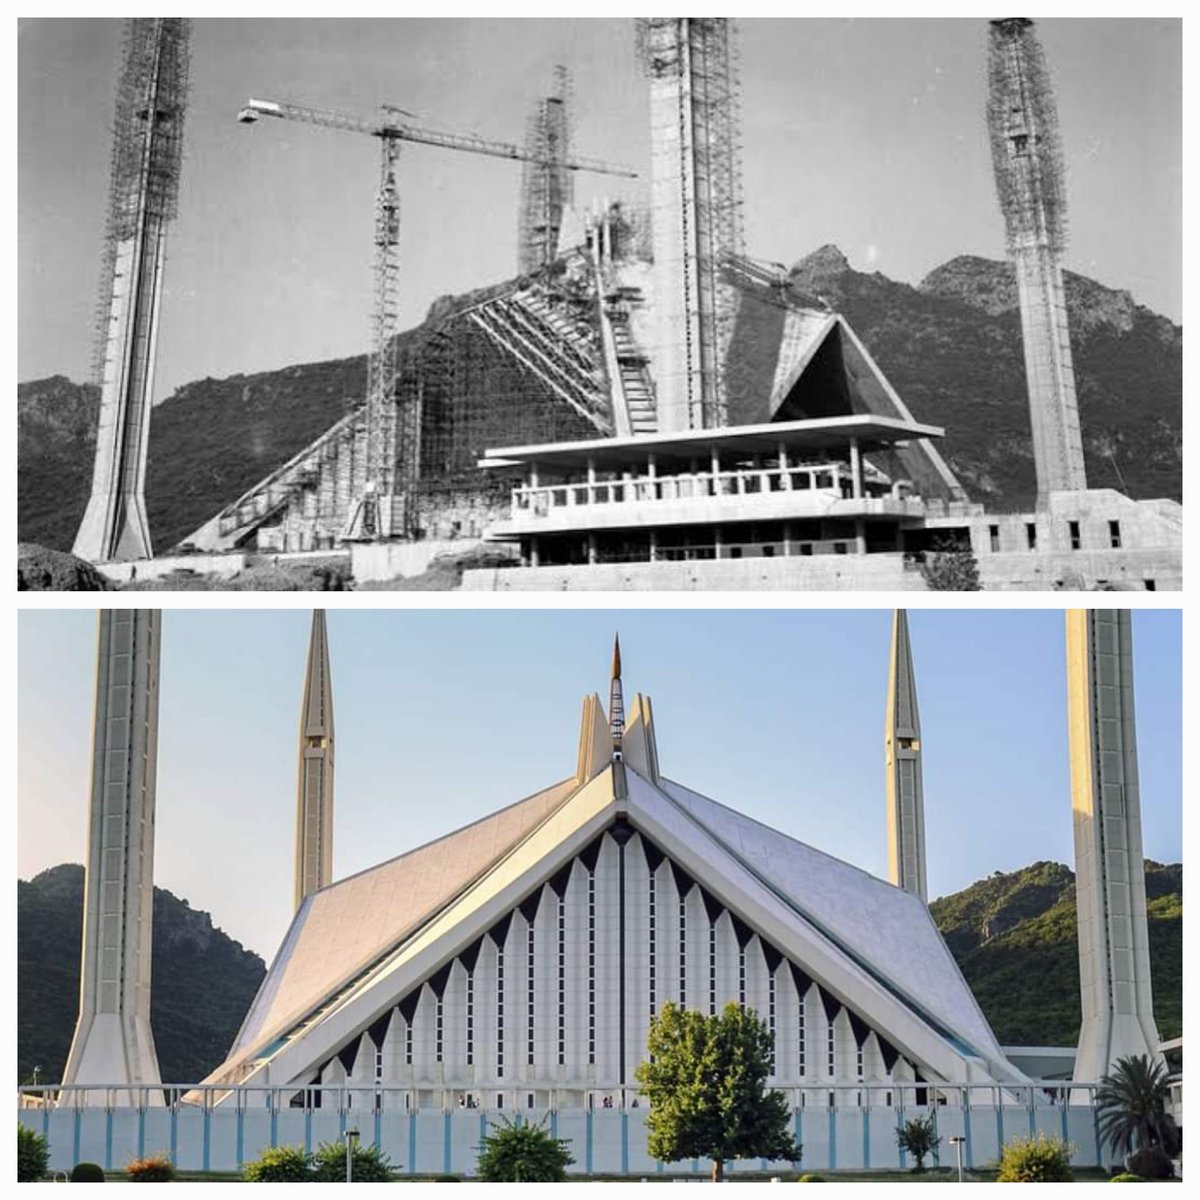 'No human masterpiece has been created without great labour.” – Andre Gide #LabourDay #MayDay 1. Bahria Icon Tower, Karachi 2. Statue of Liberty, New York 3. Faisal Mosque, Islamabad 4. Bahria Icon, Karachi